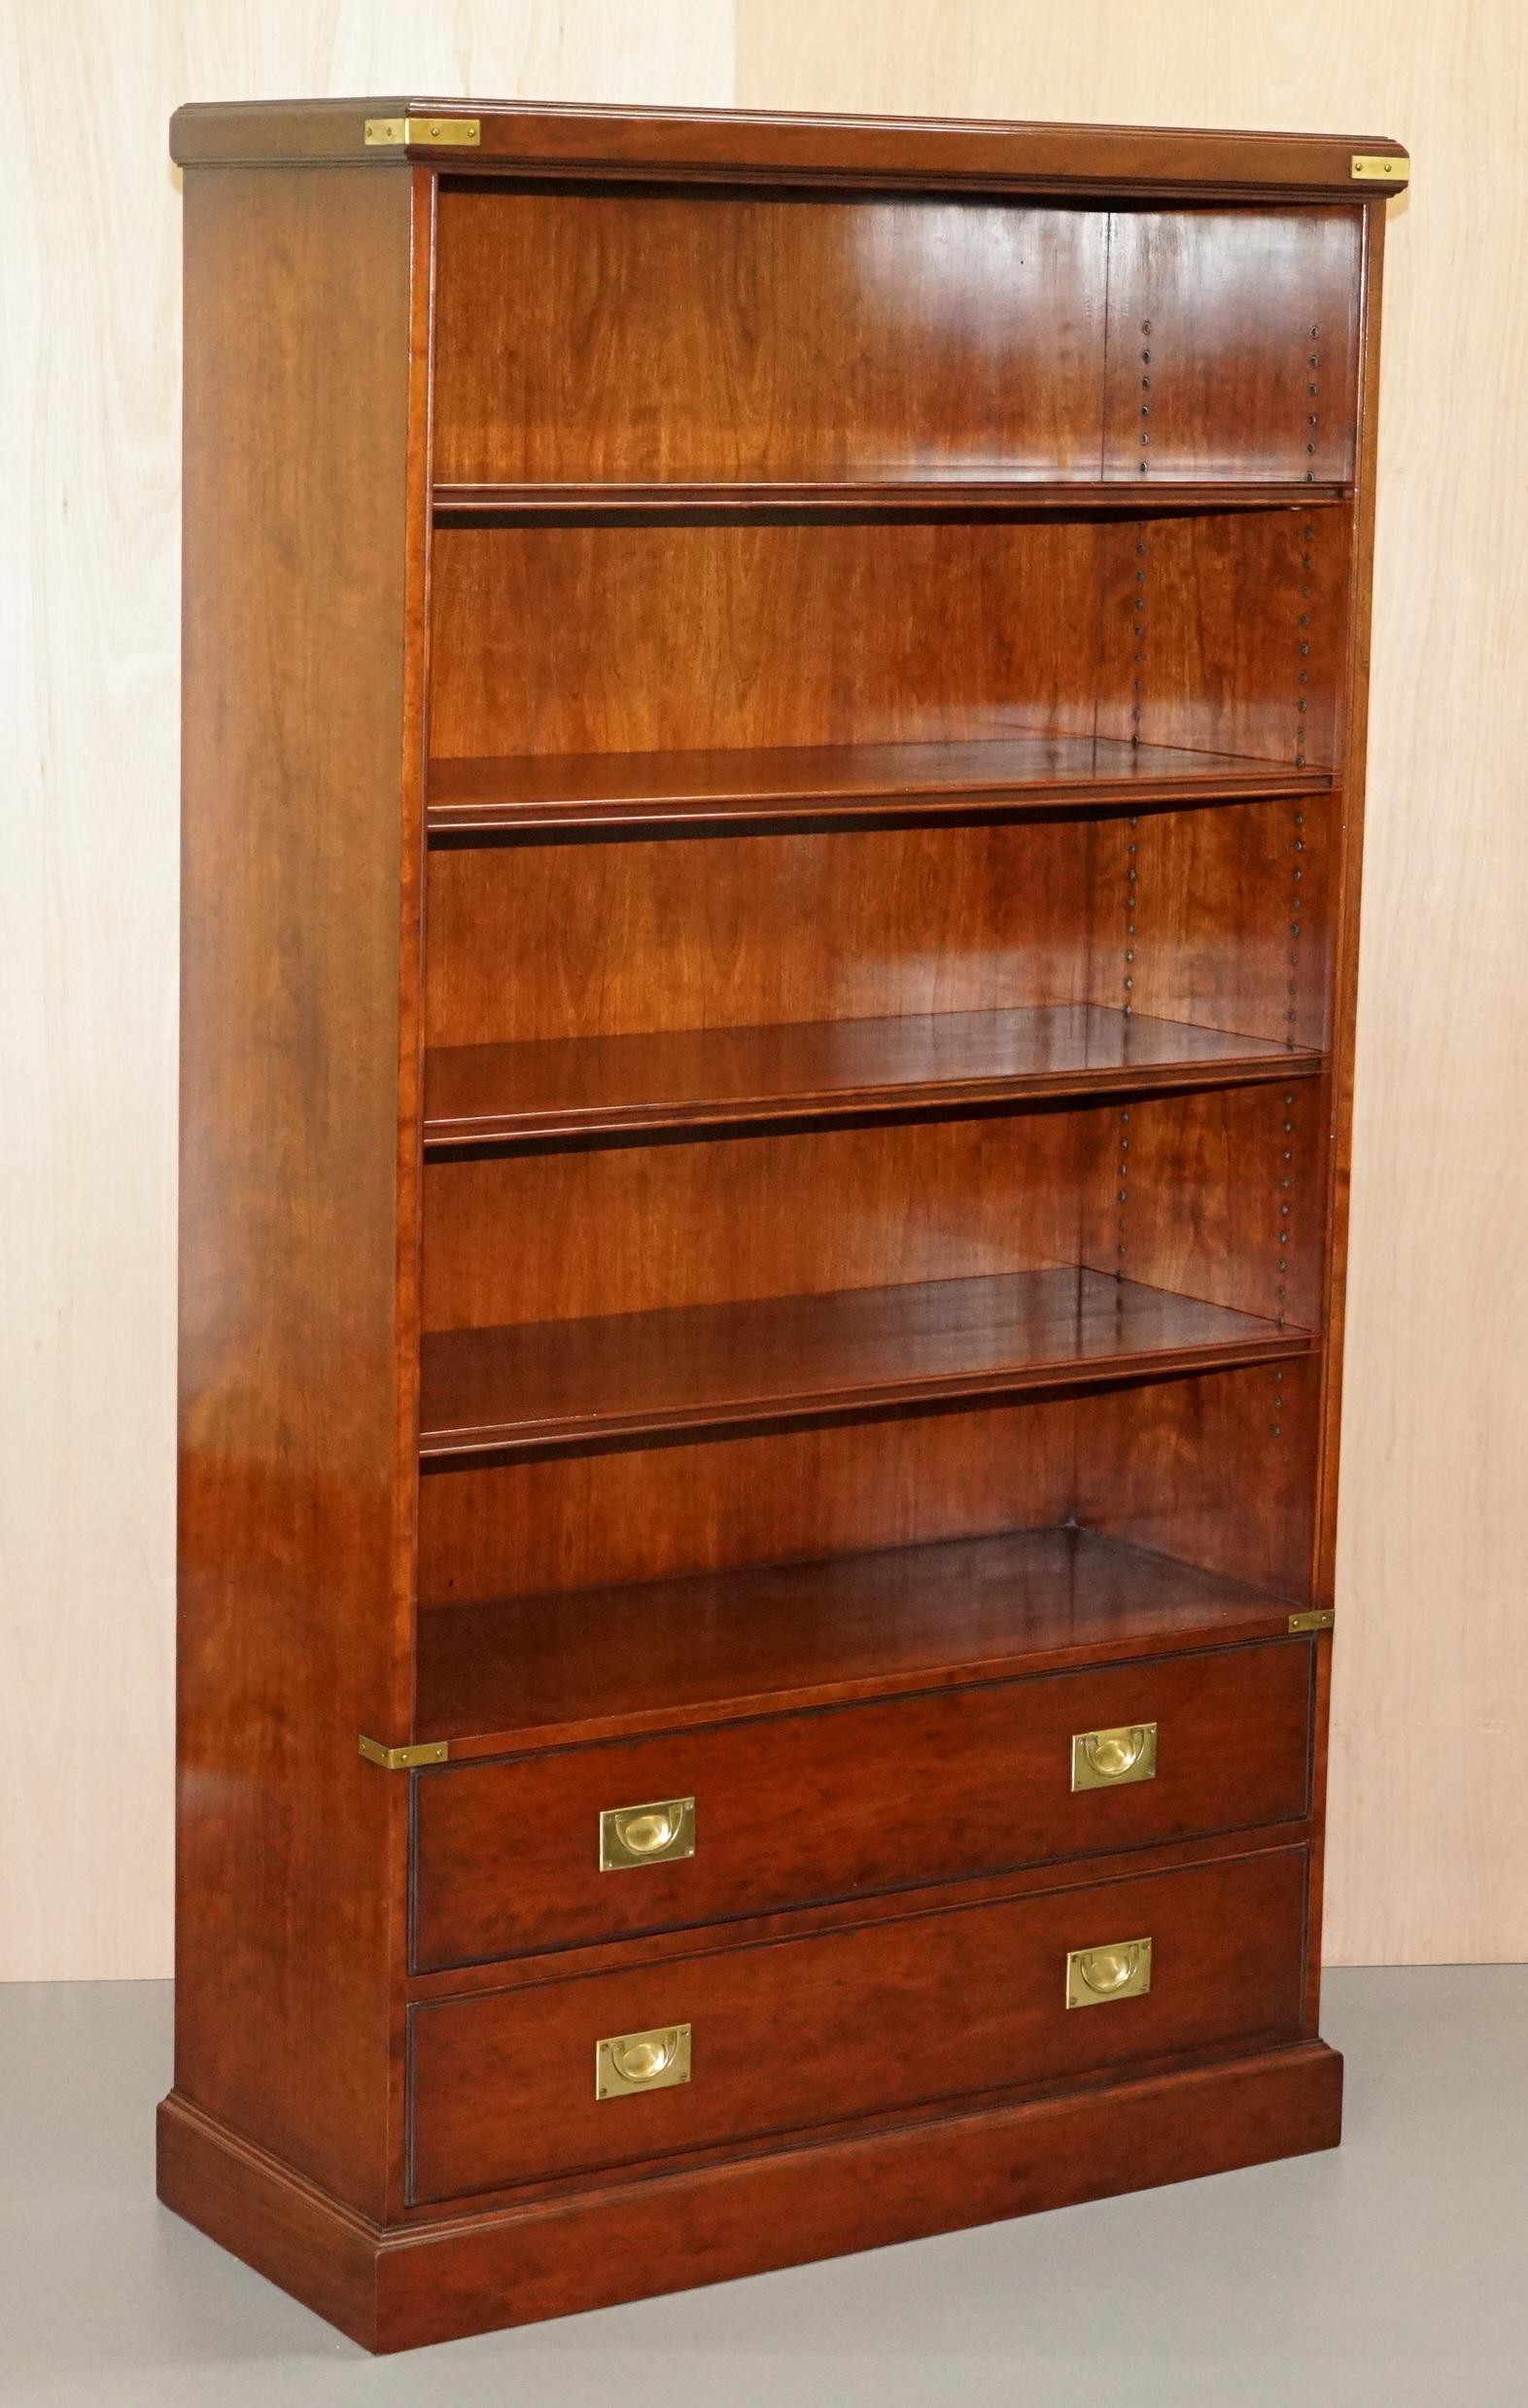 We are delighted to offer for sale this stunning RRP Kennedy furniture handmade in England and retails through Harrods London Military campaign bookcase with drawers

A very good looking solid and well made piece, ideally suited for a Library or